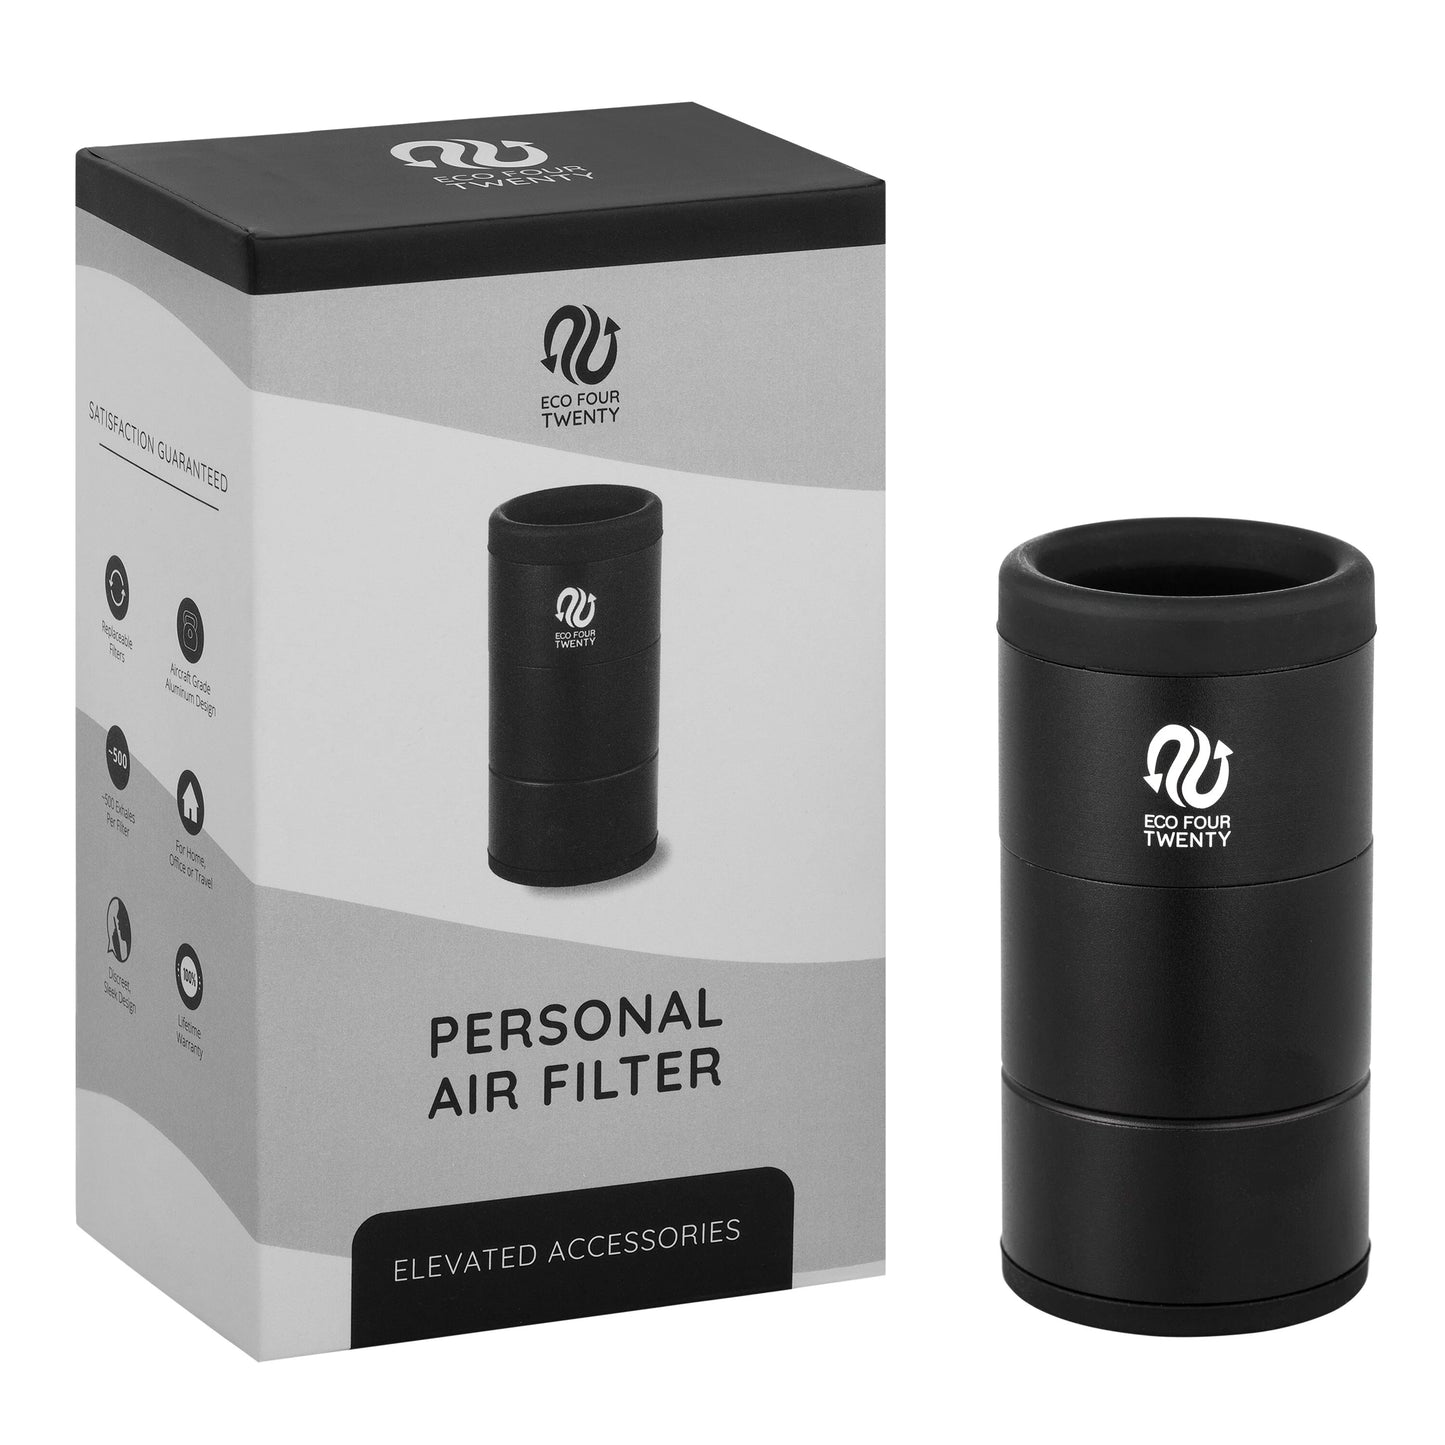 BUY ONE GET ONE FREE - Personal Air Filter With Replaceable Cartridge System